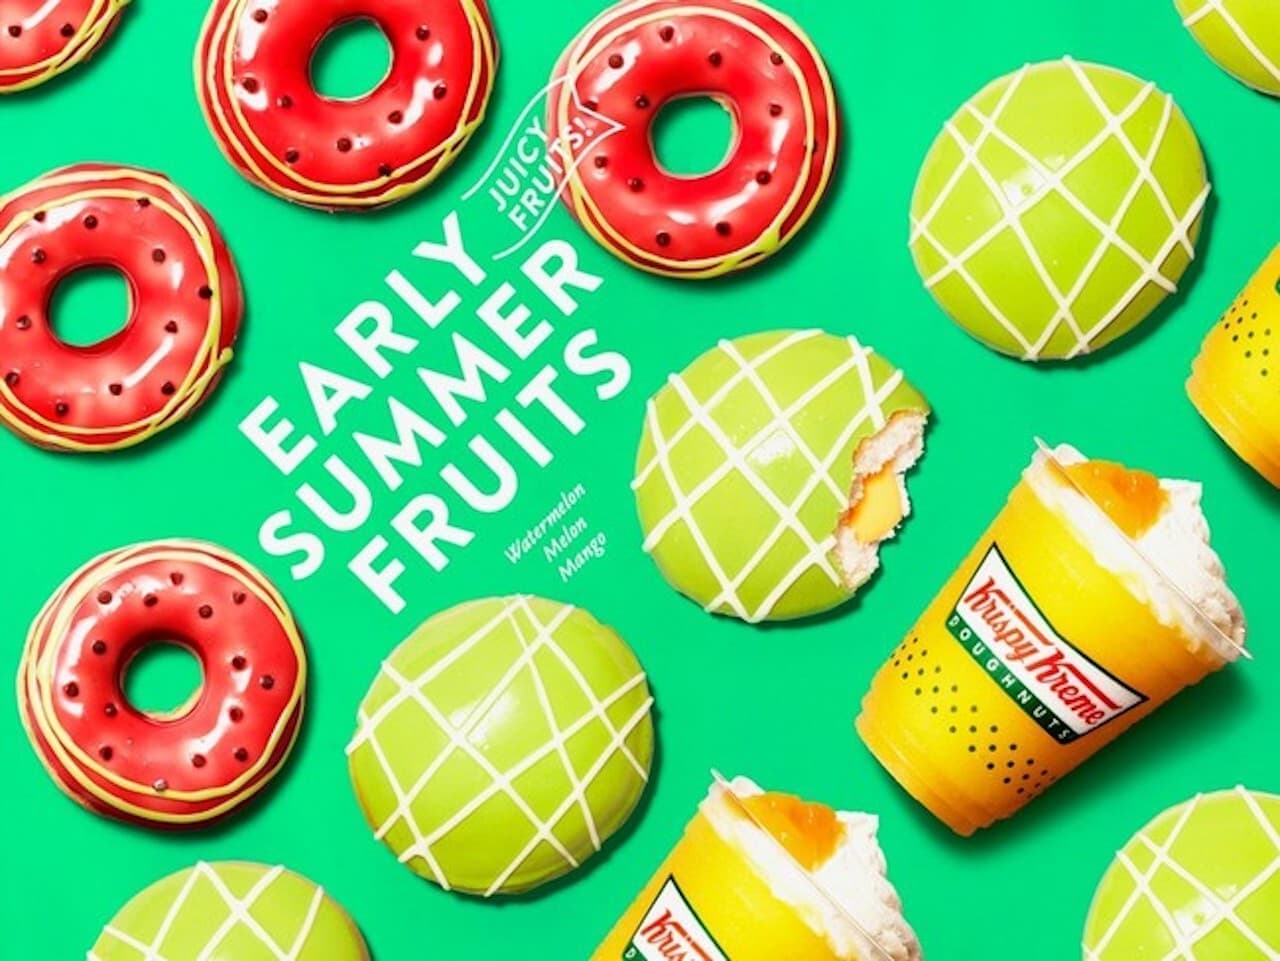 From "EARLY SUMMER FRUITS" crispy cream donuts such as "watermelon ring" limited to early summer